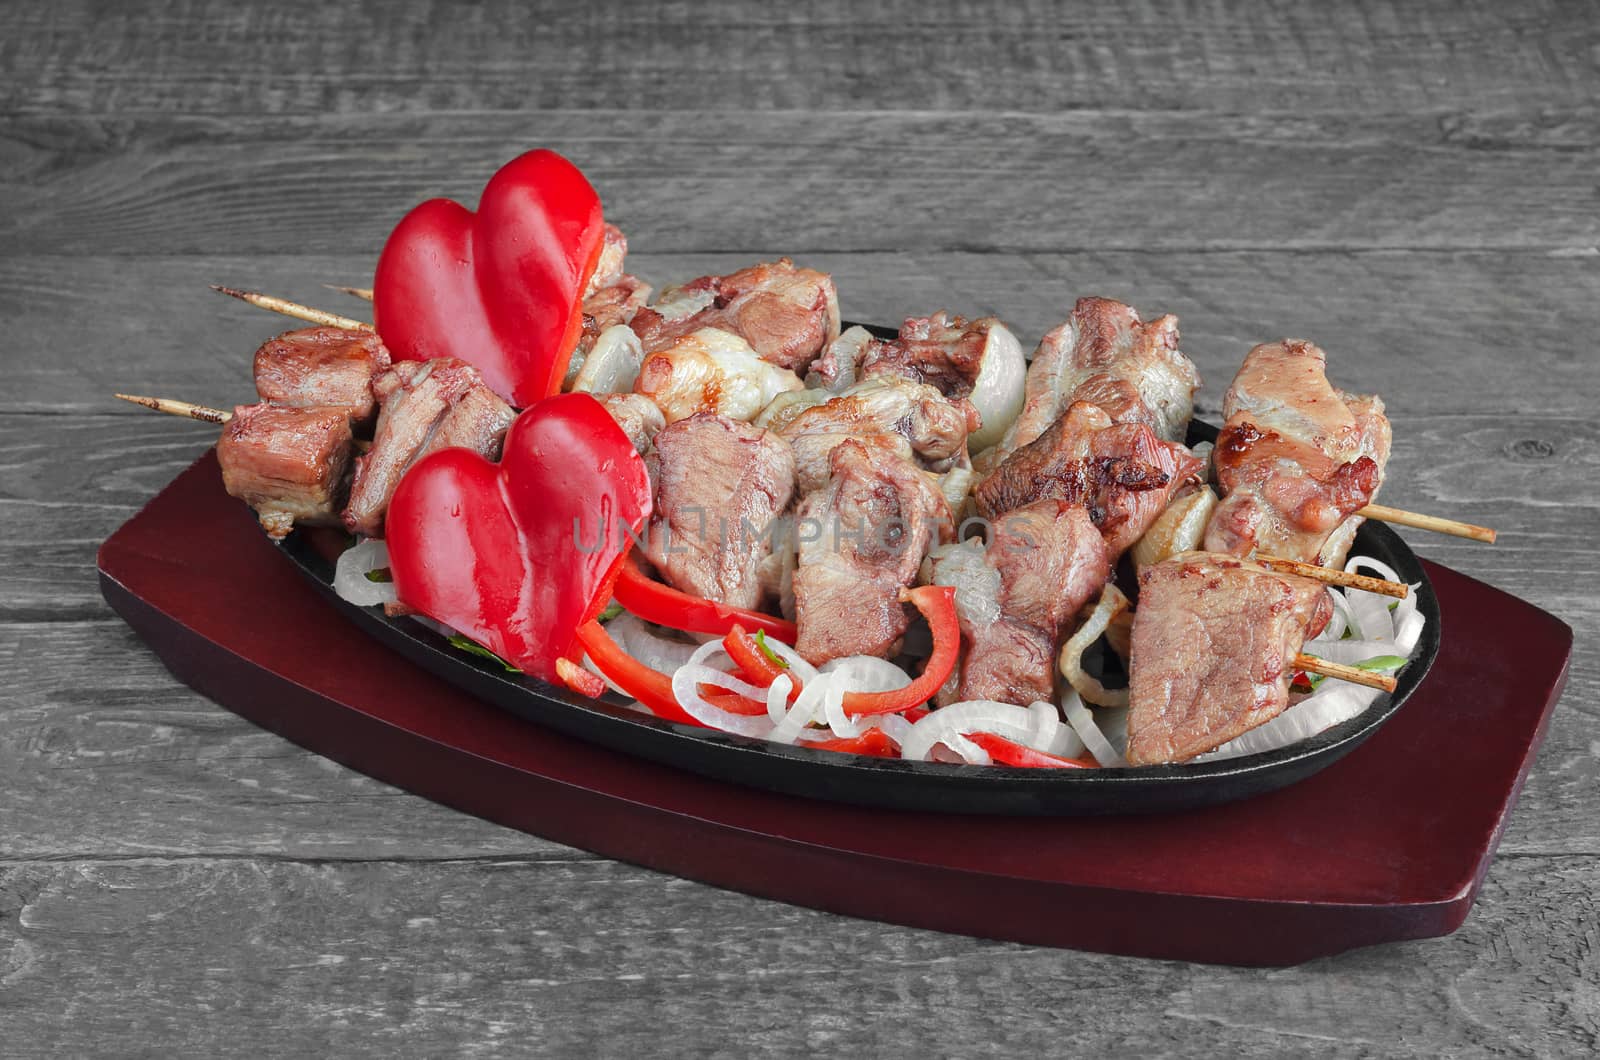 Pork kebab with salad of sweet peppers and onions by Gaina